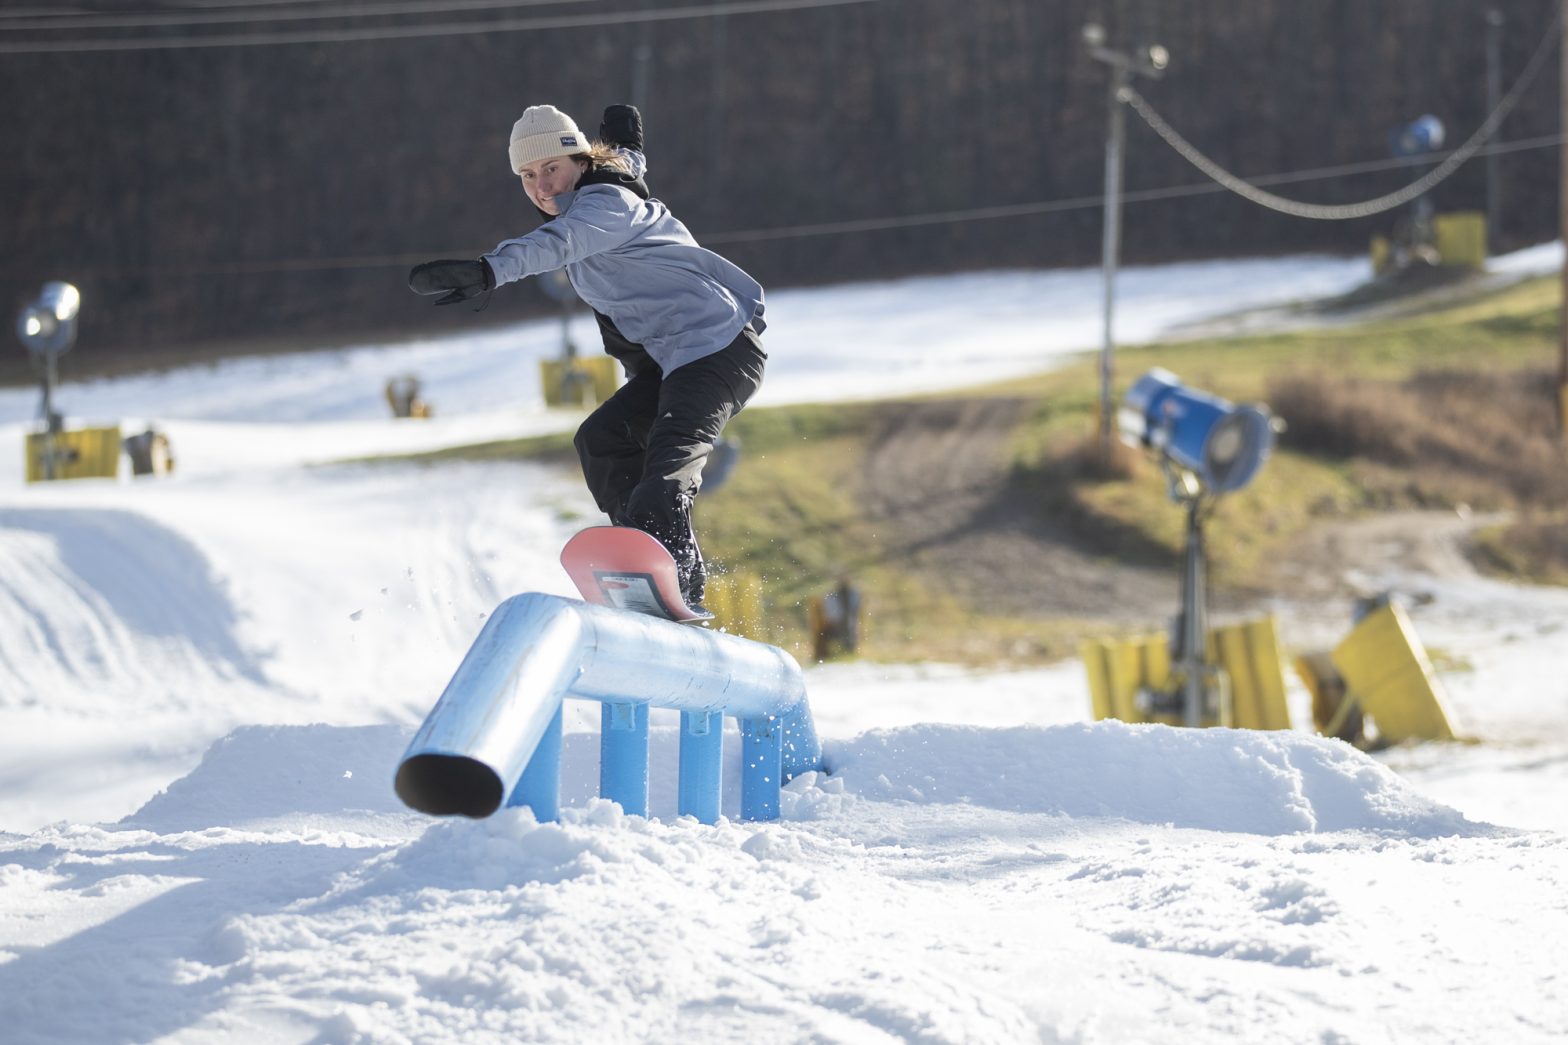 Snowboarder at Mountain Creek in Vernon New Jersey